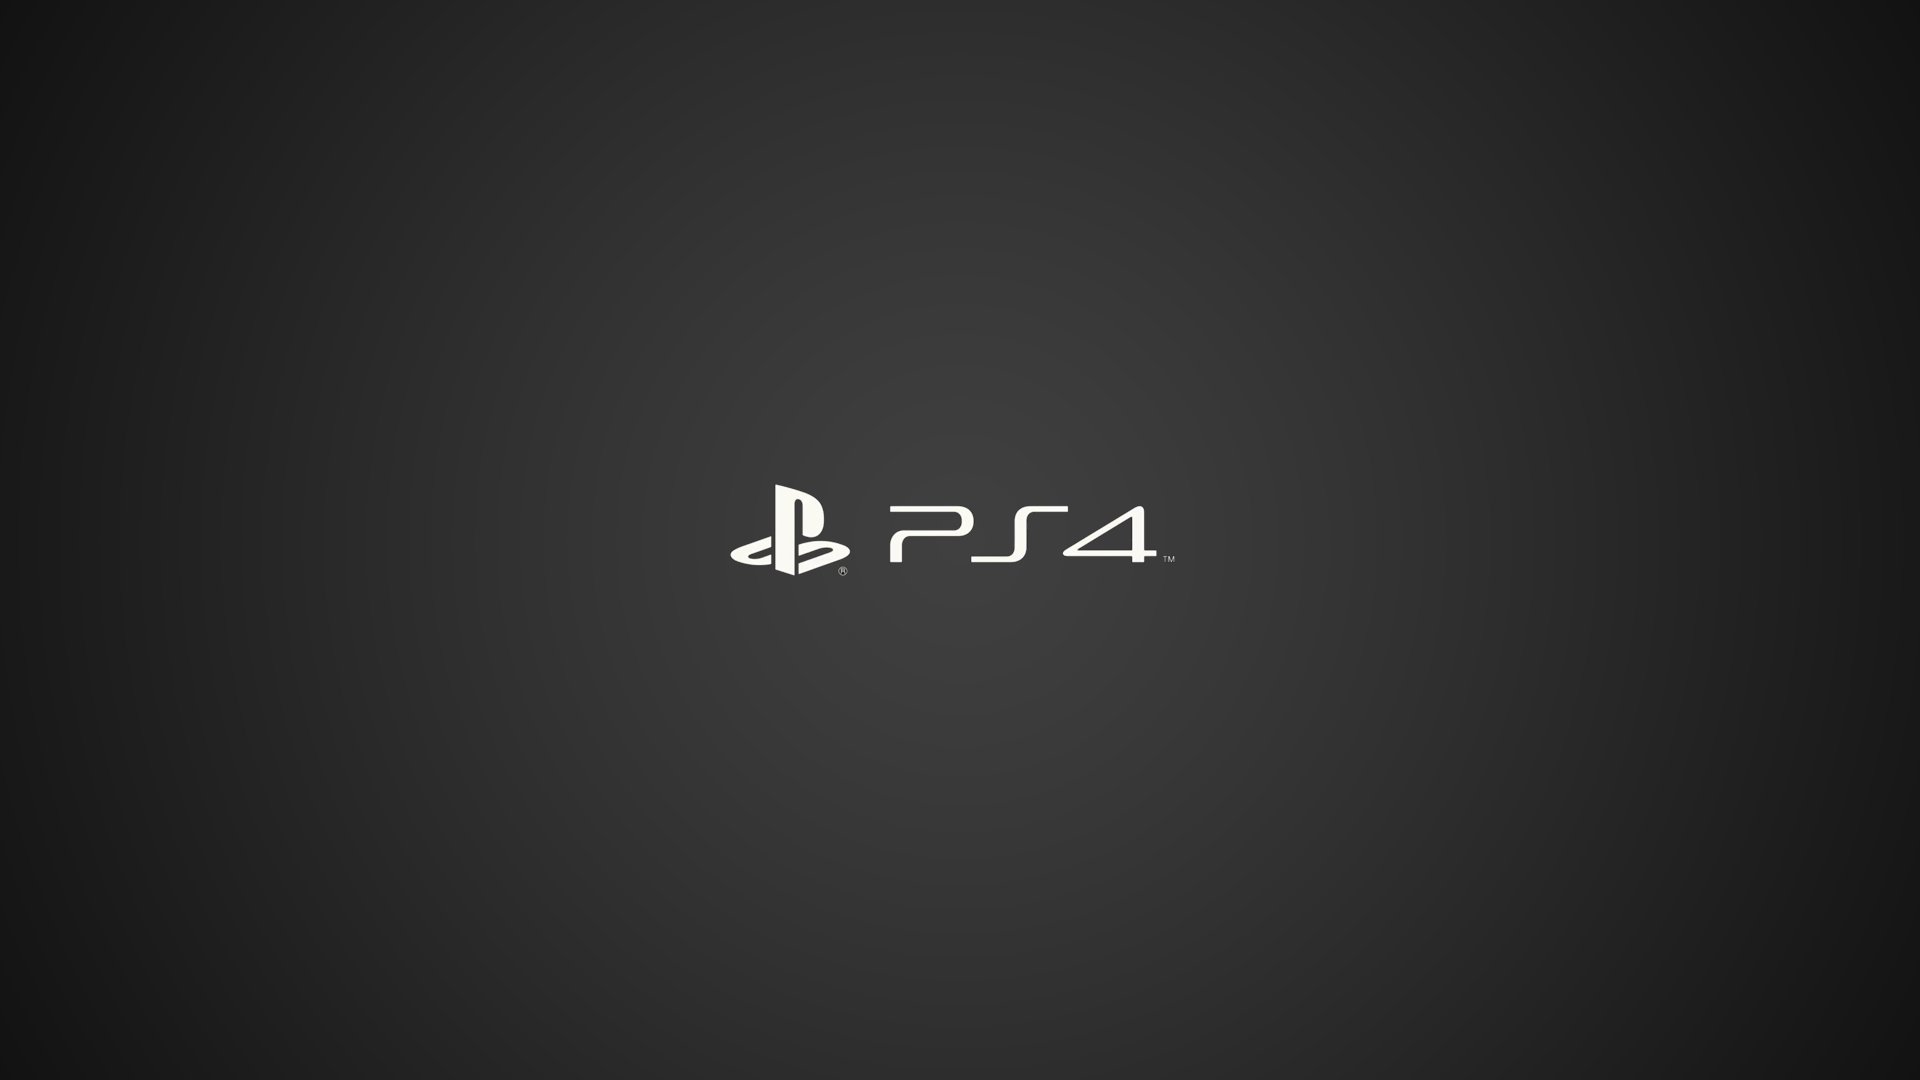 Sony PlayStation 4 Wallpapers, Pictures, Images